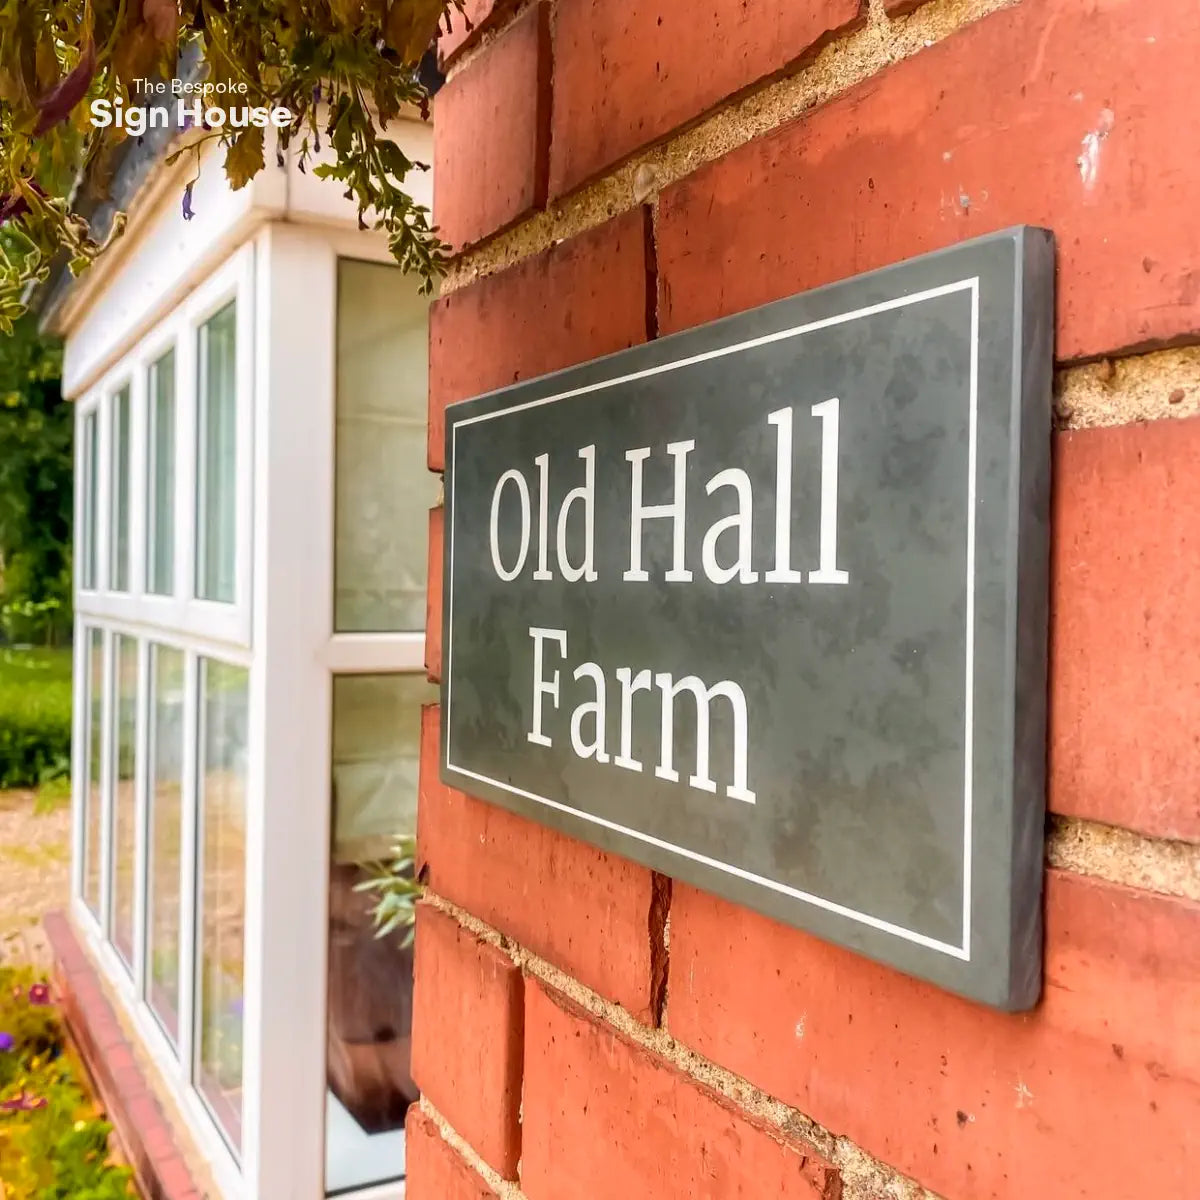 a large house sign on a red brick wall, with a straight border design